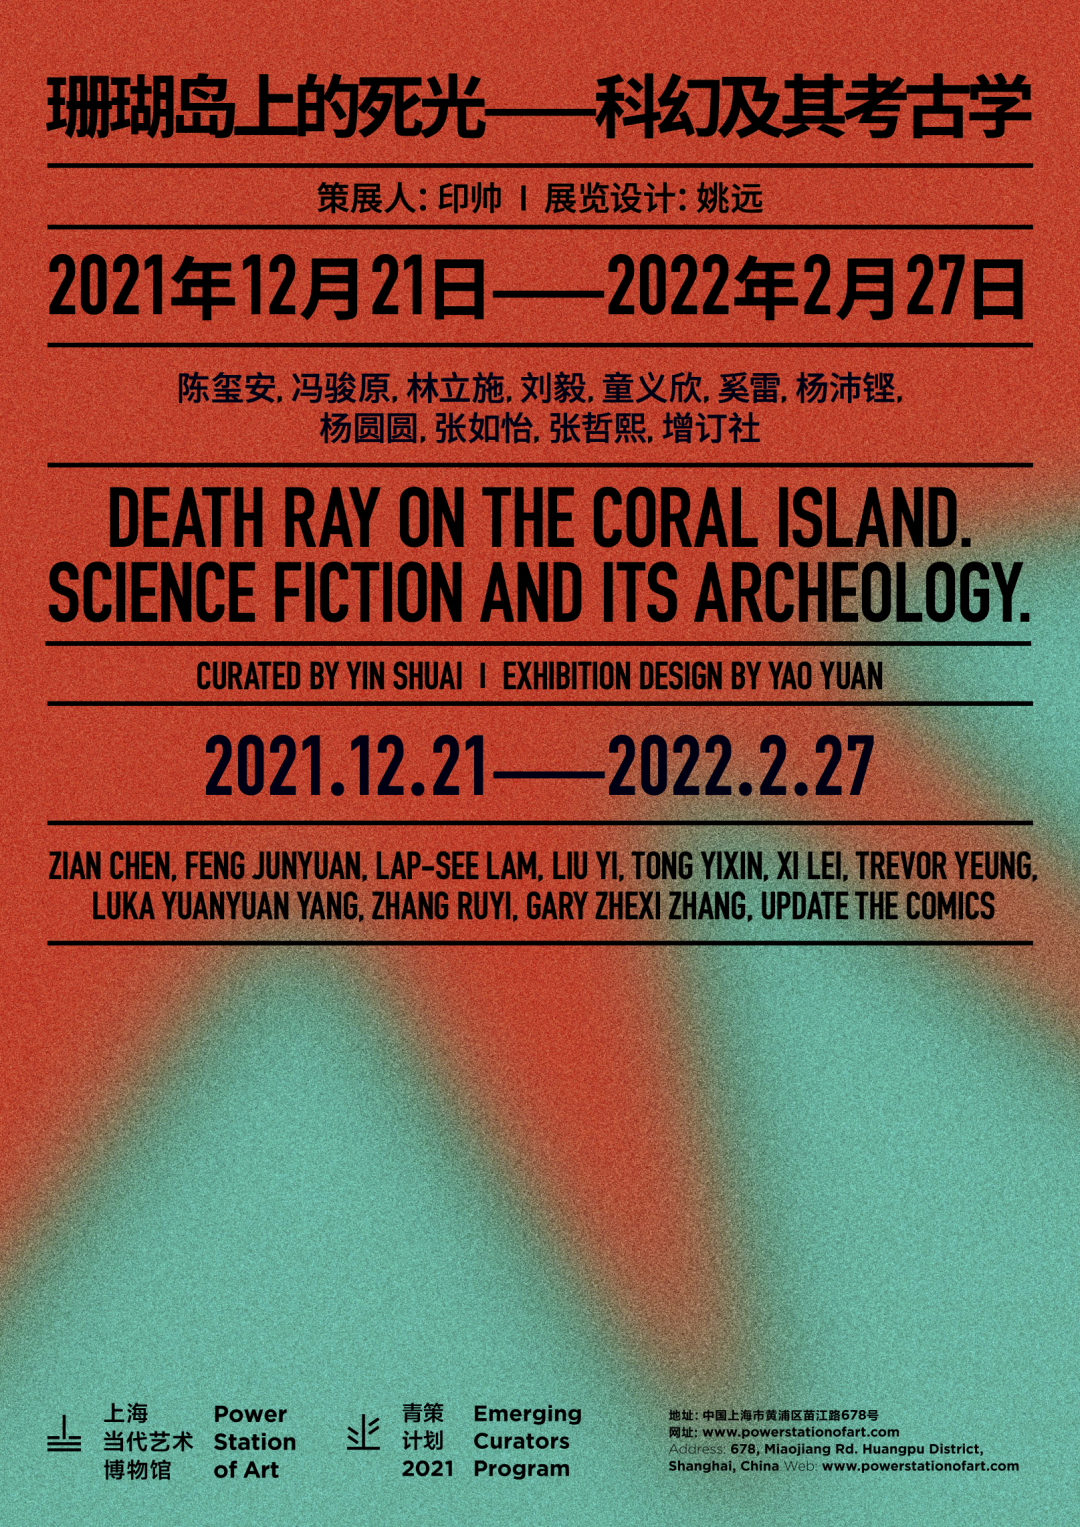 Trevor Yeung participates in group exhibition “Death Ray on a Coral Island. Science Fiction and its Archeology” at Shanghai Power Station of Art